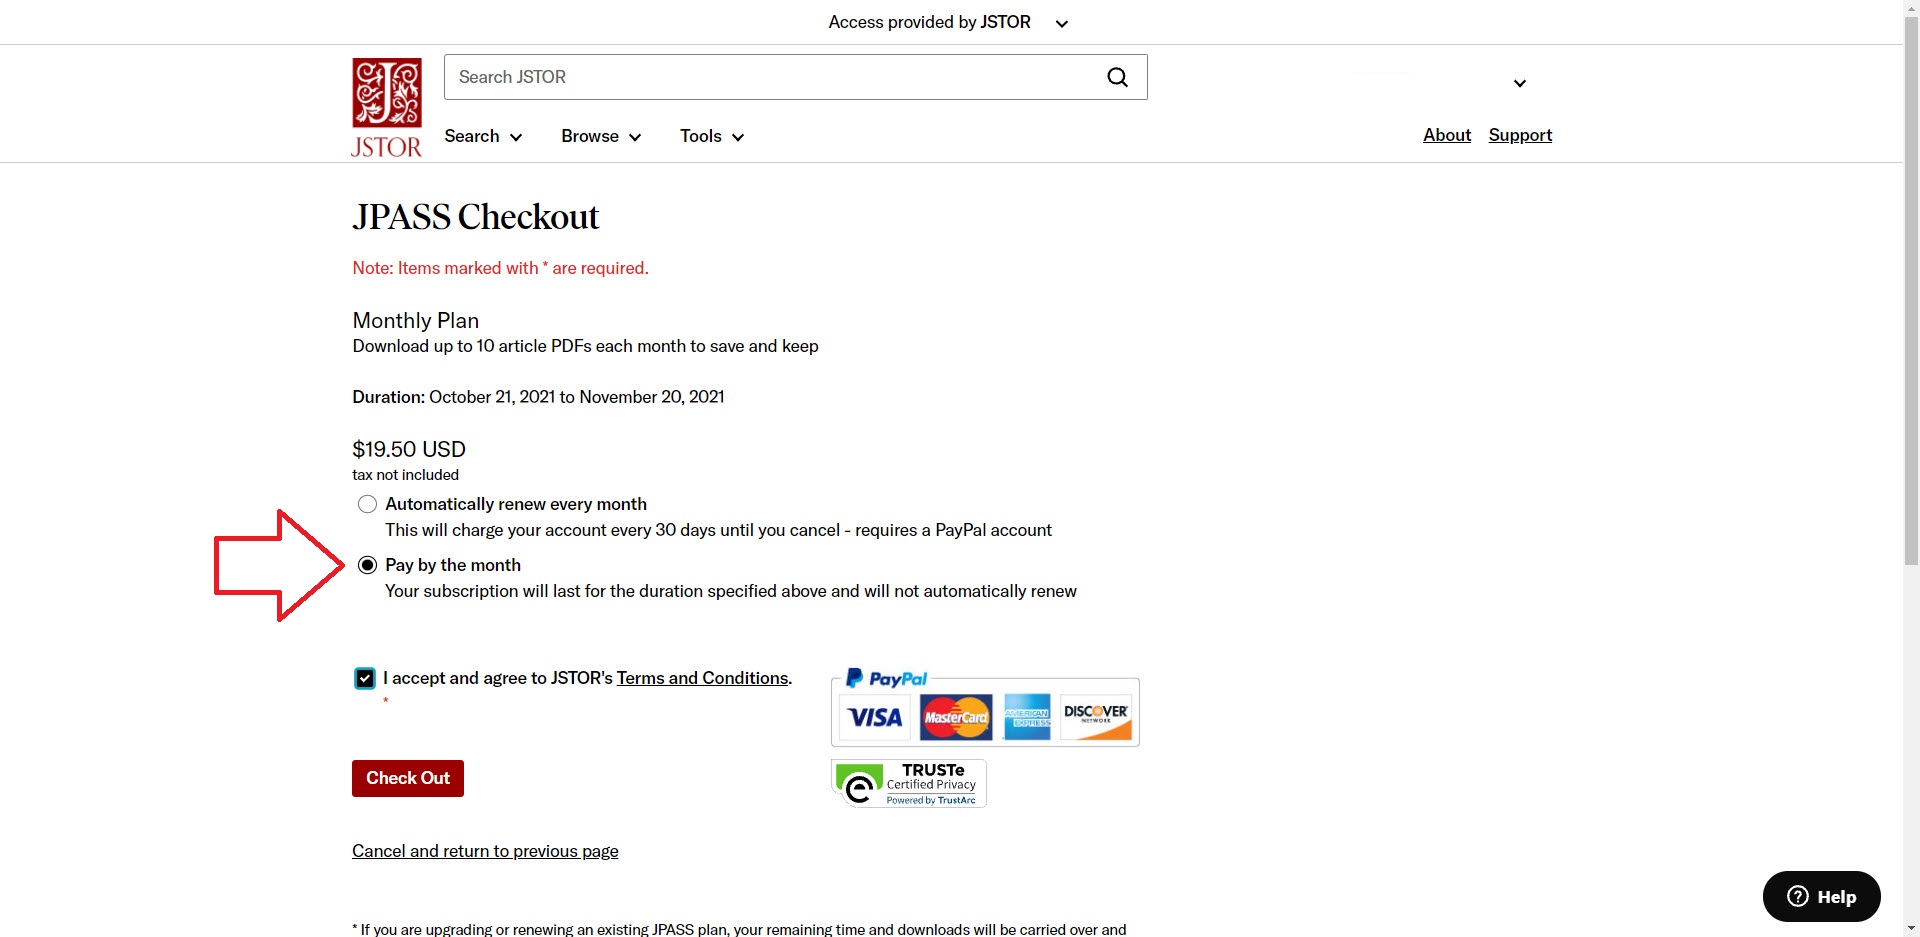 example of JPASS checkout screen.jpg